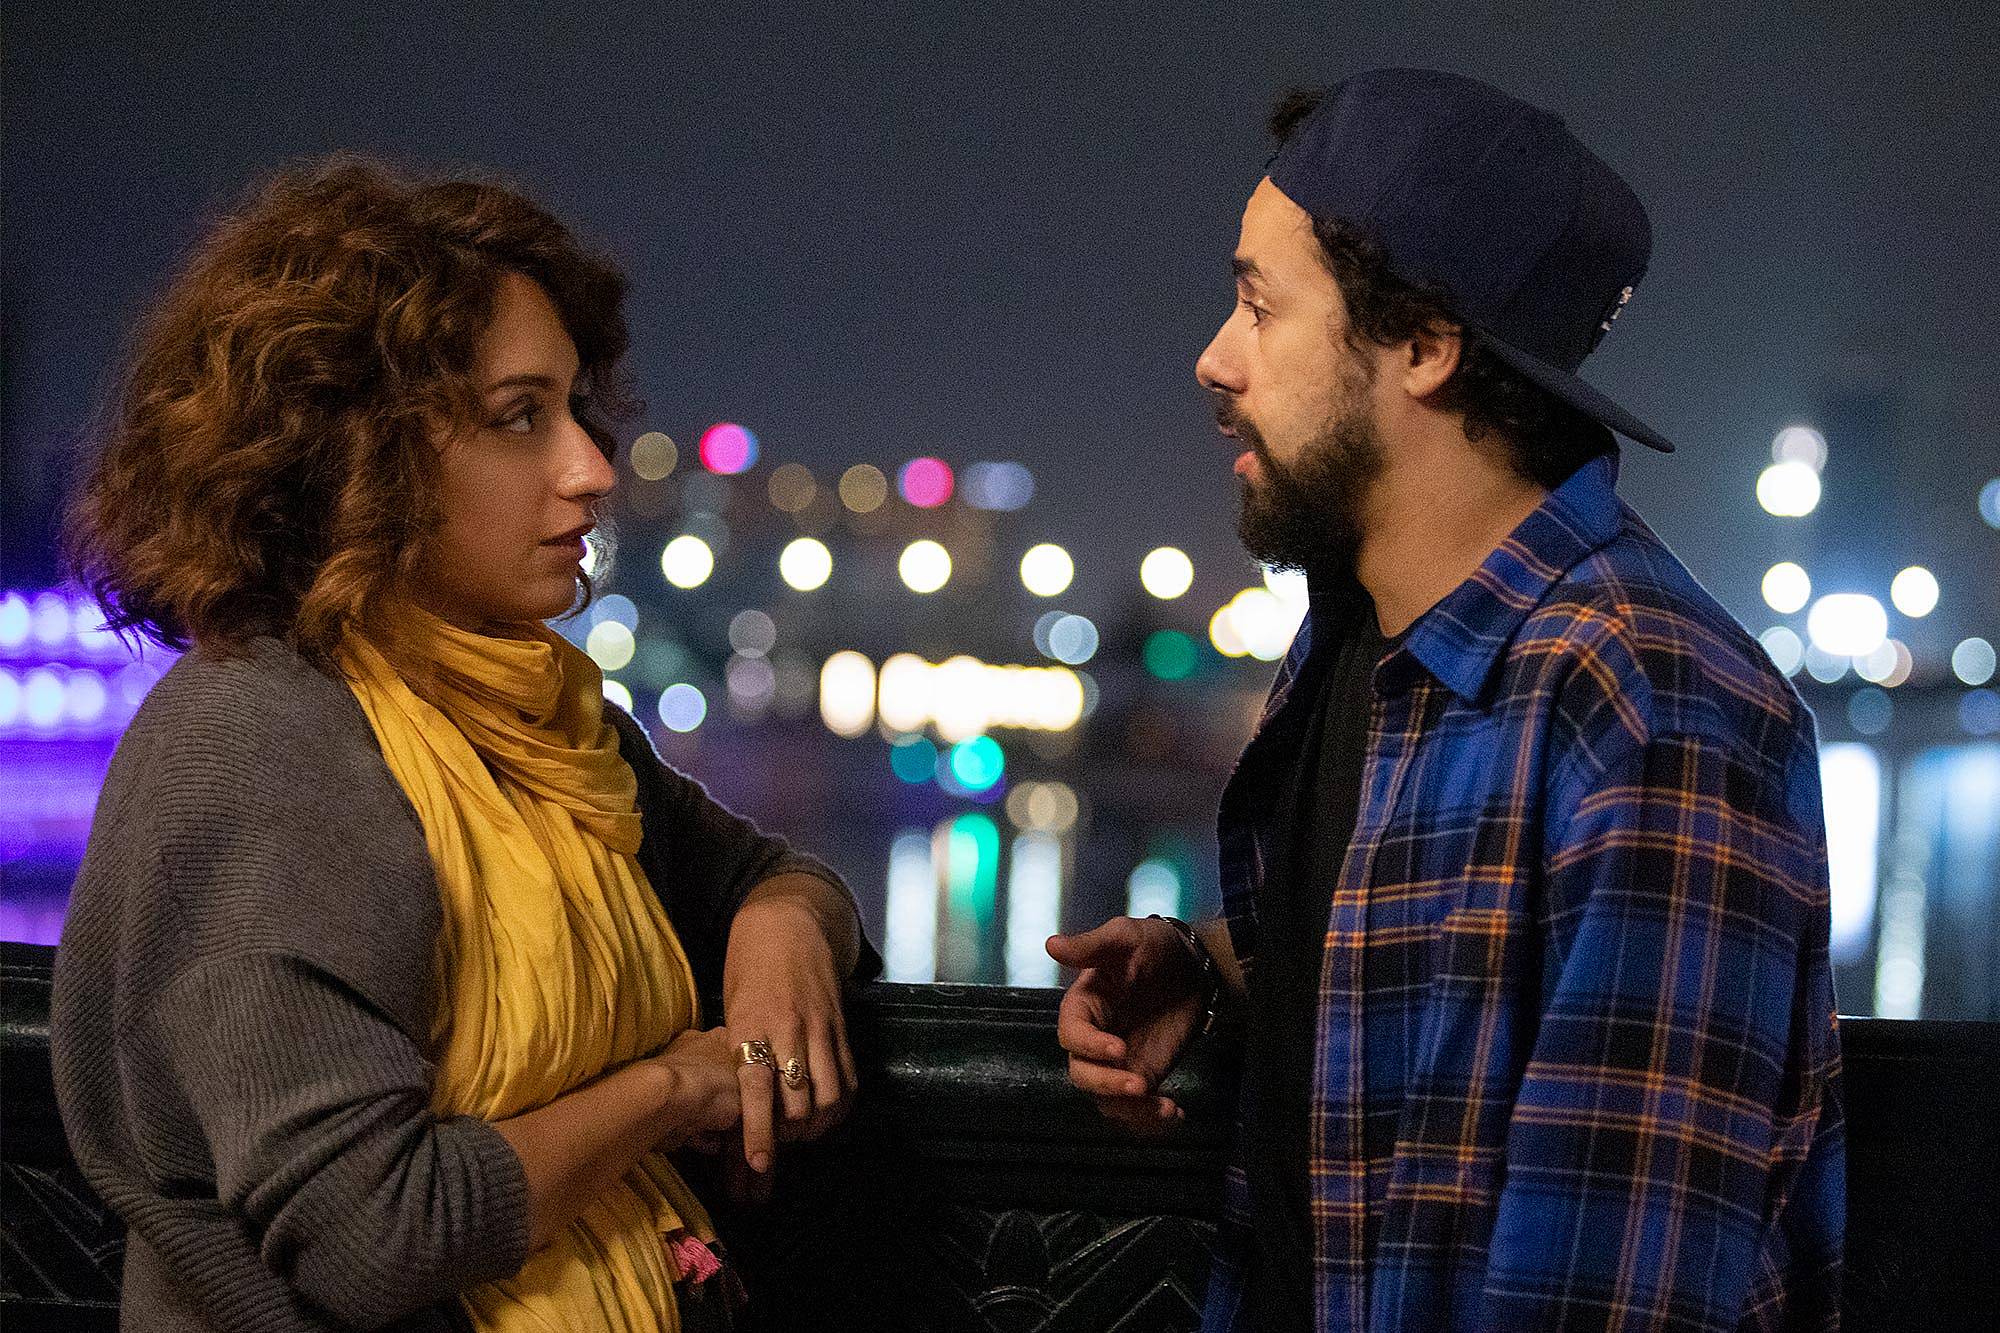 Ramy falls for his cousin, played by Rosaline Elbay - but it causes complications (Hulu)